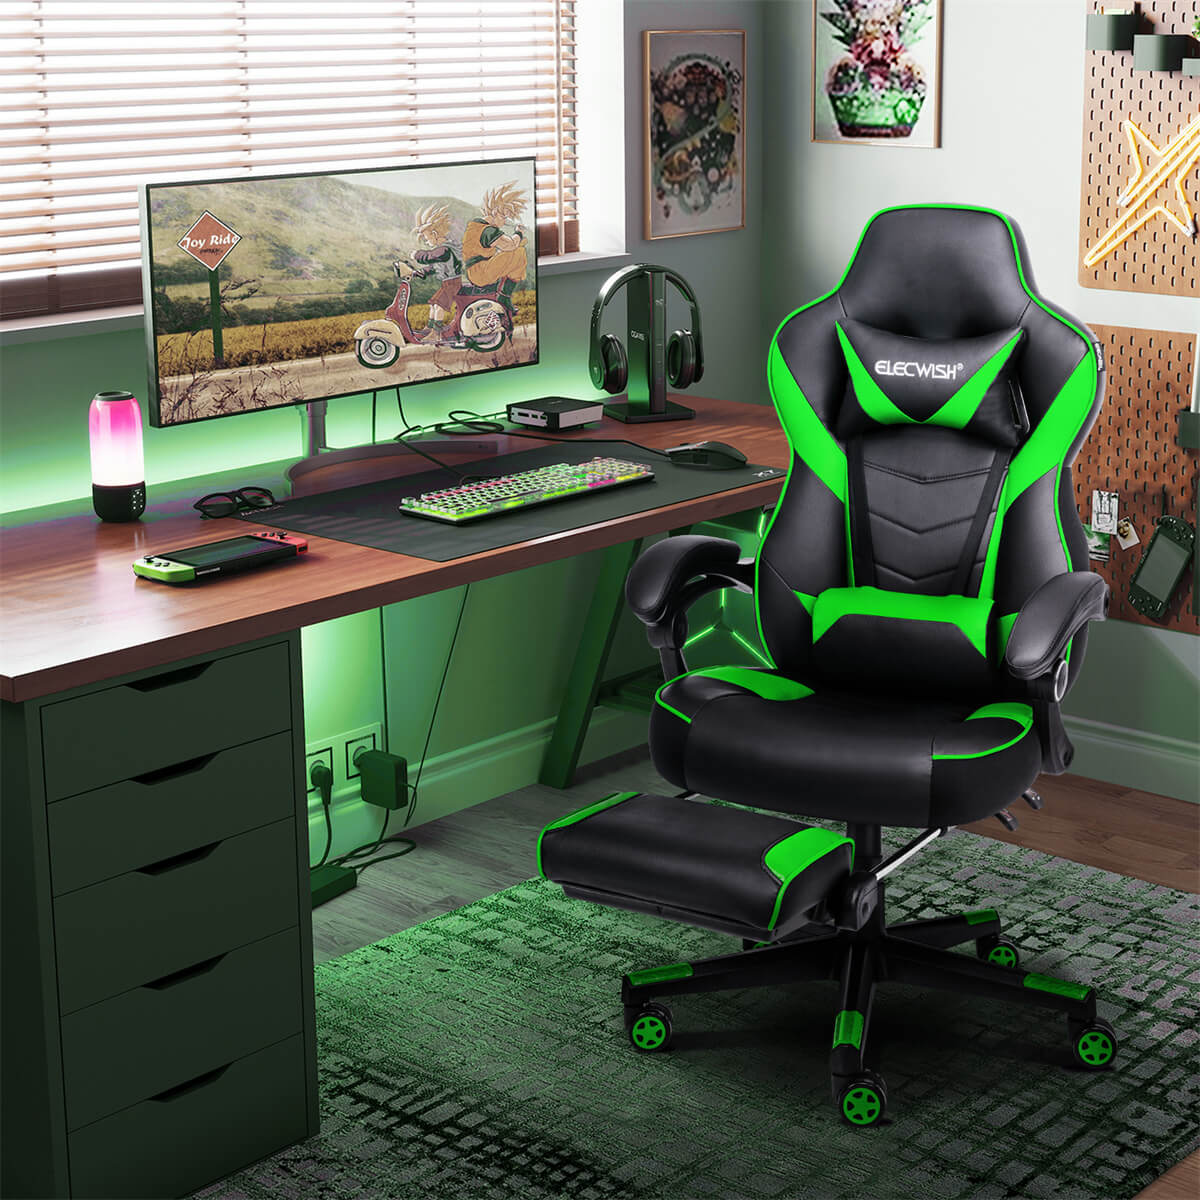 Elecwish Video Game Chairs Green Gaming Chair With Footrest OC087 displays in room